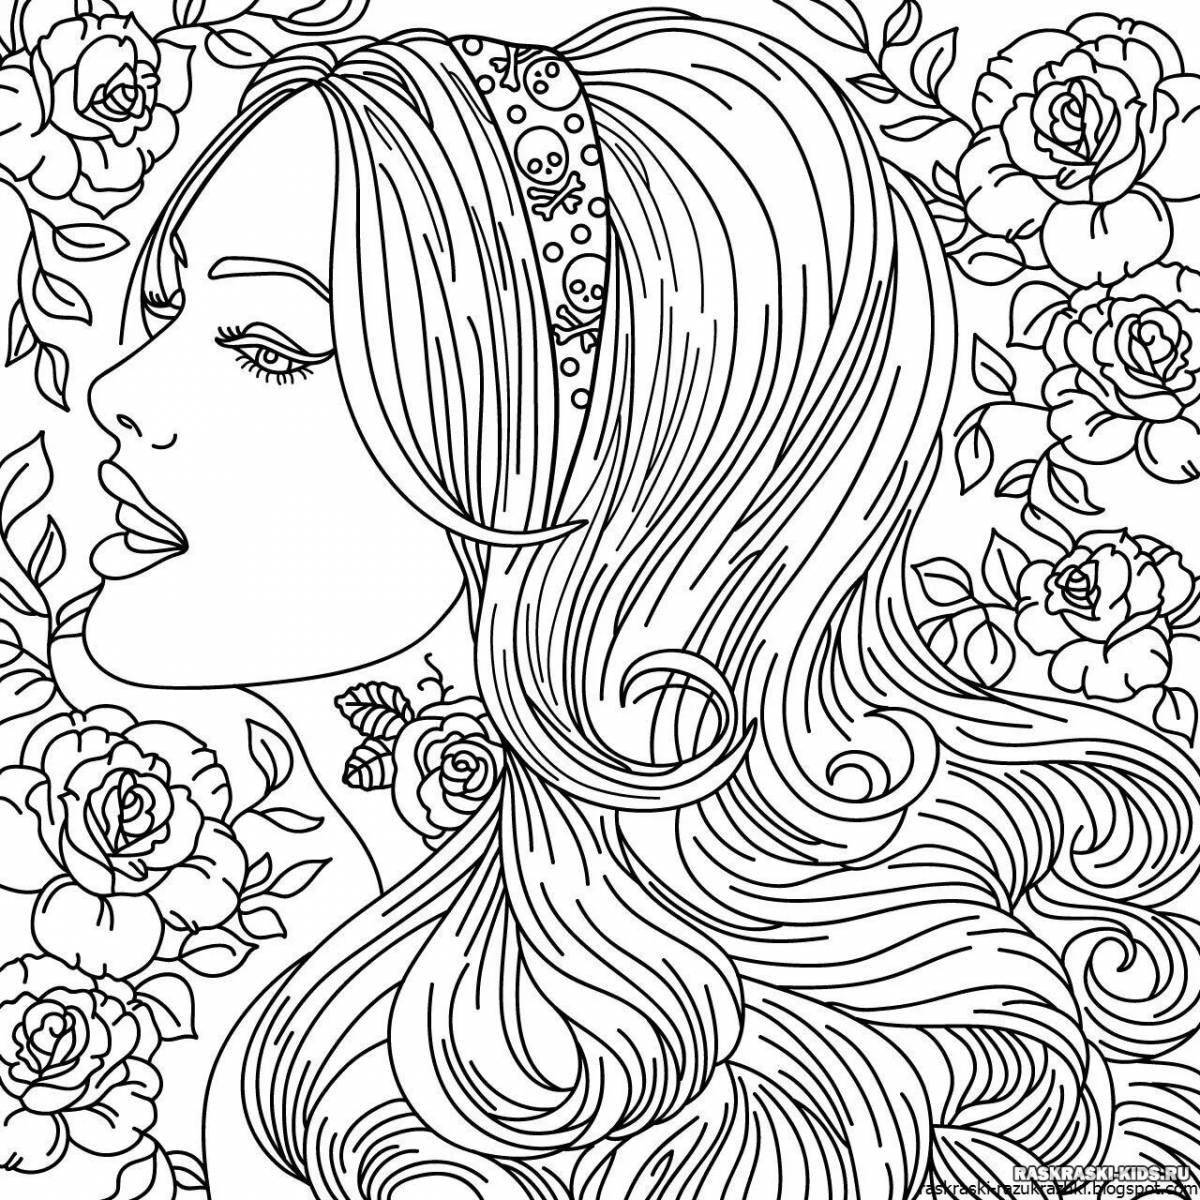 Dazzling coloring page 17 years old